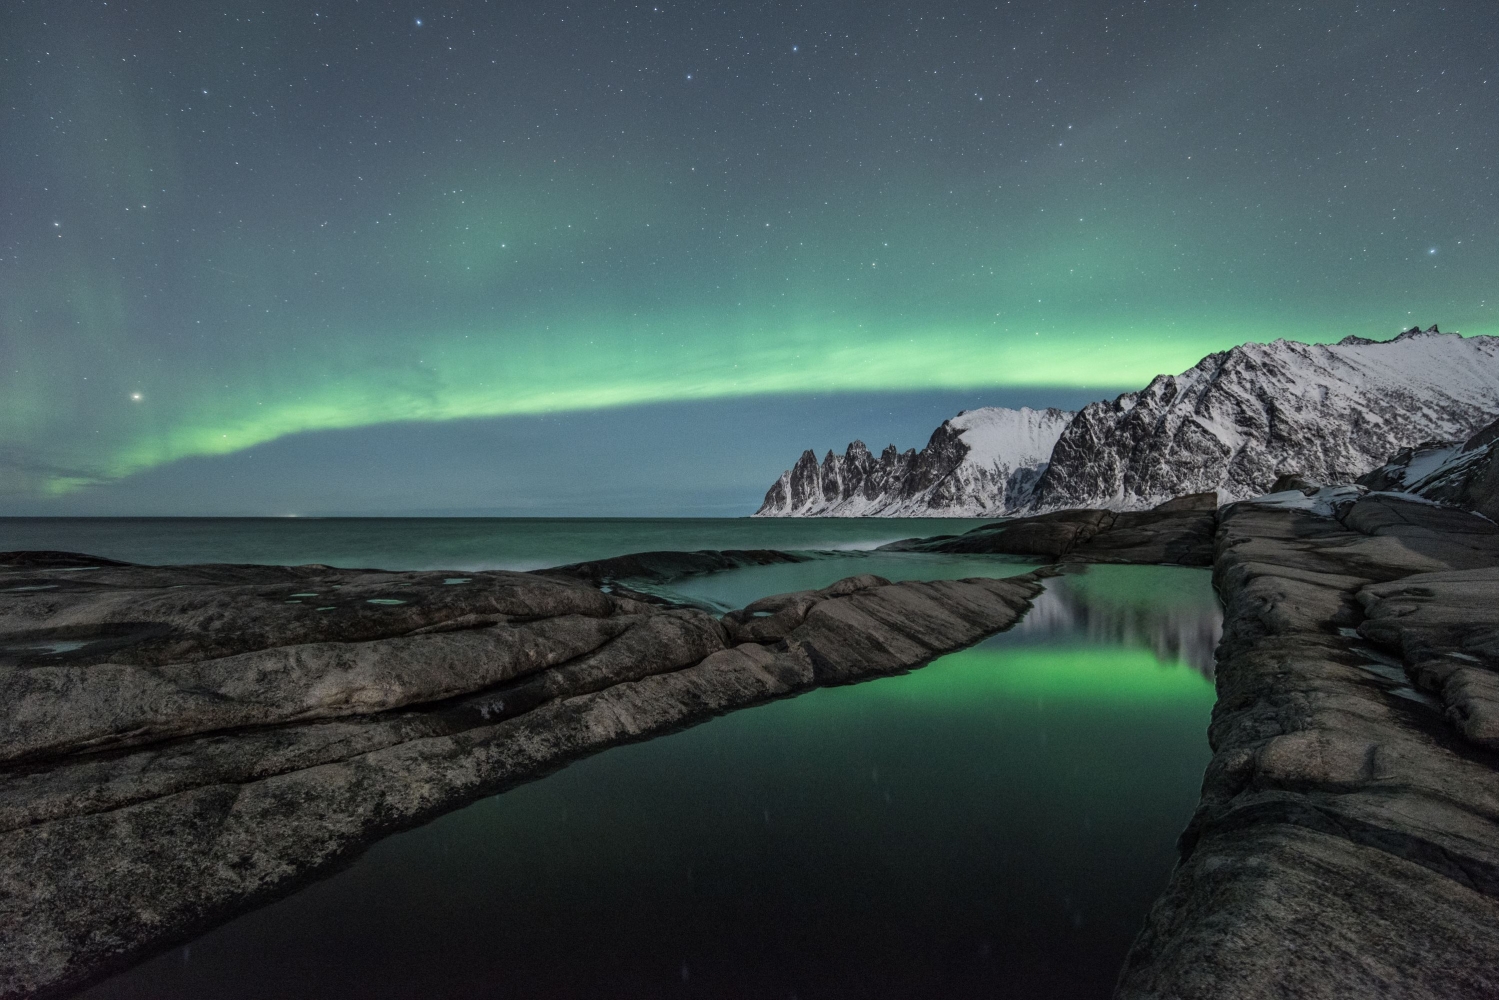 Northern lights above sea and mountains